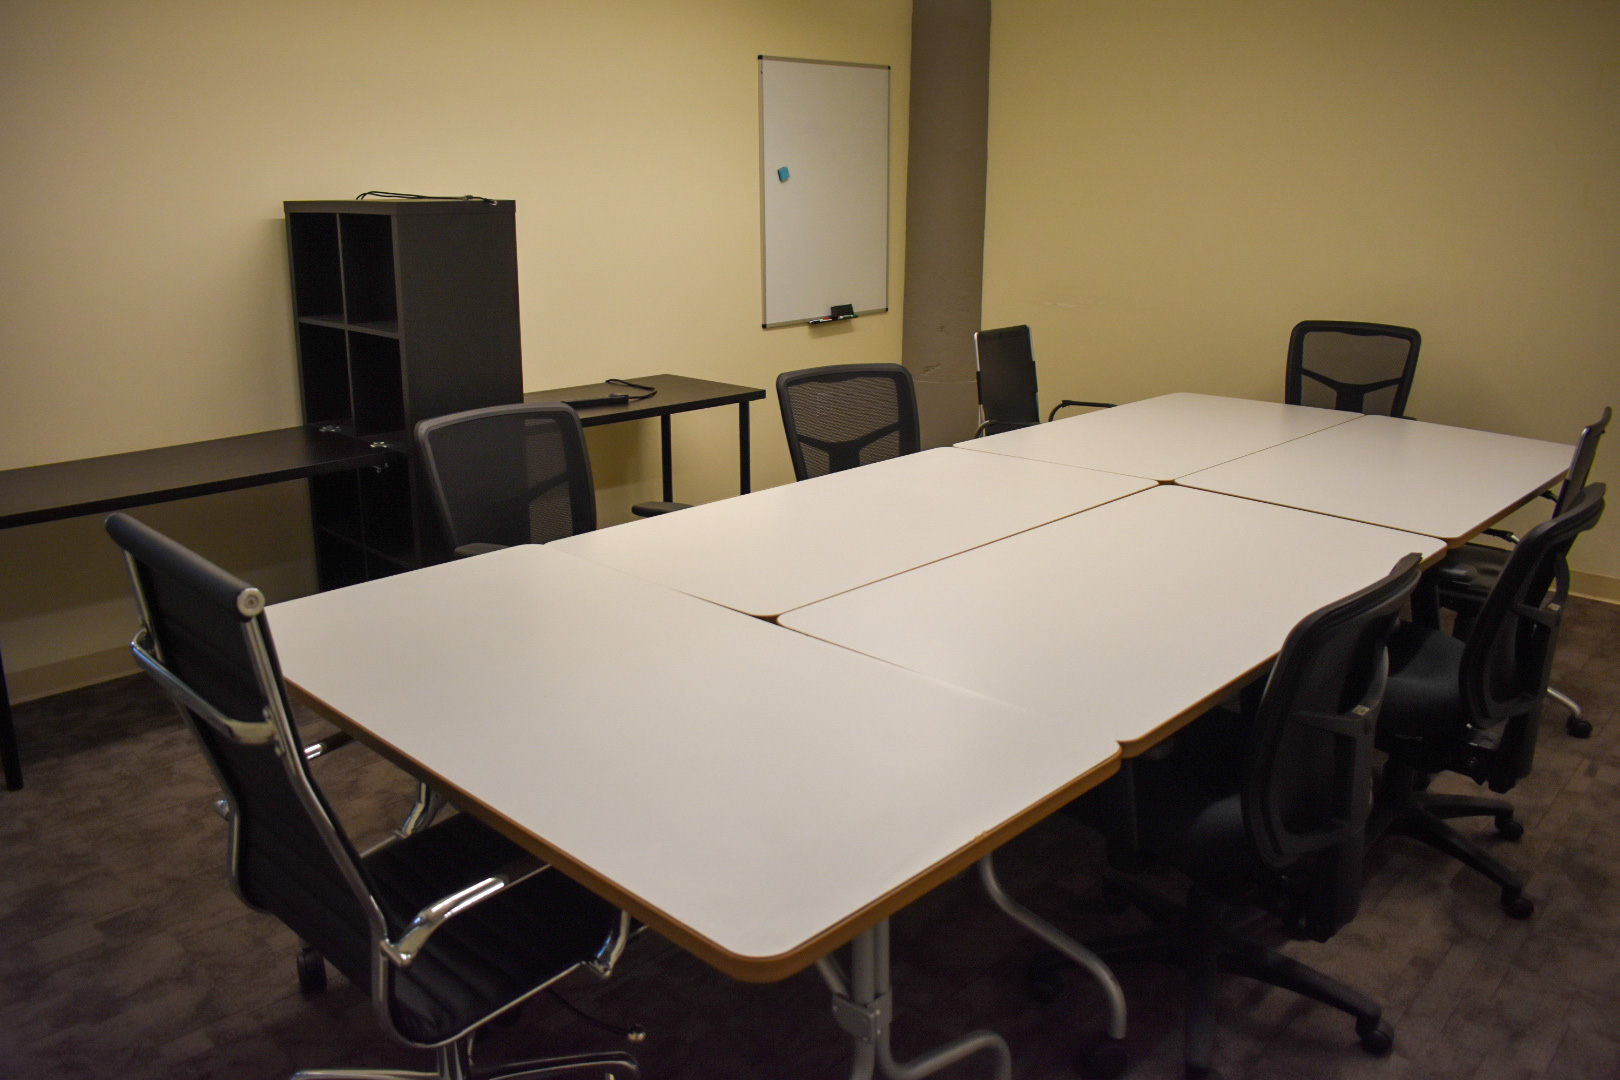 Observation Baltimore in-person Focus Group Facility 